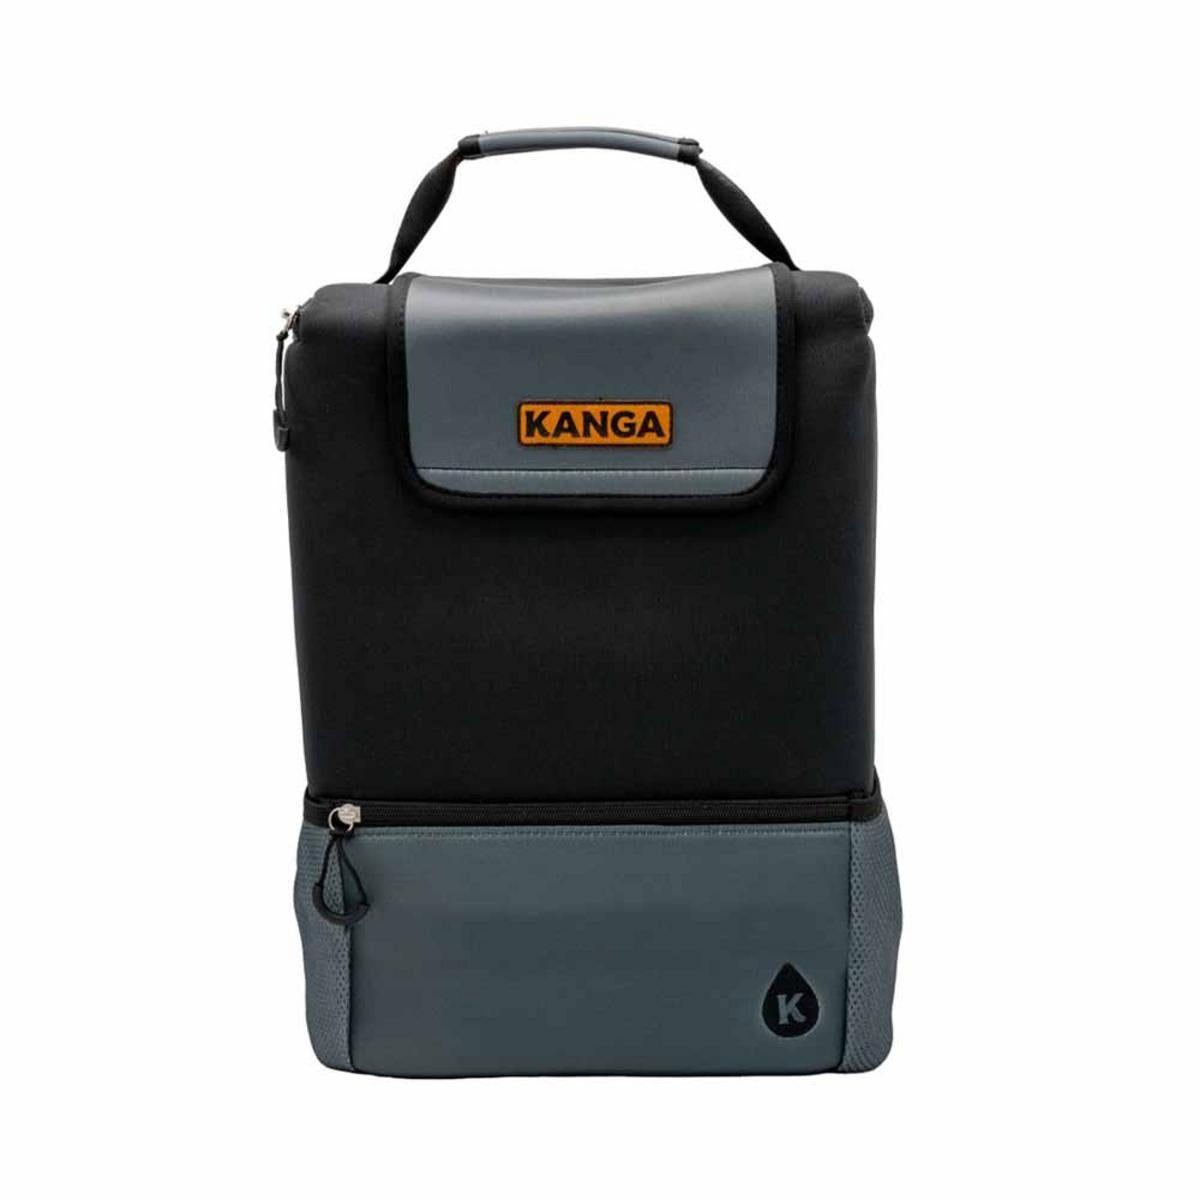 Kanga Coolers Pouch 24 Backpack